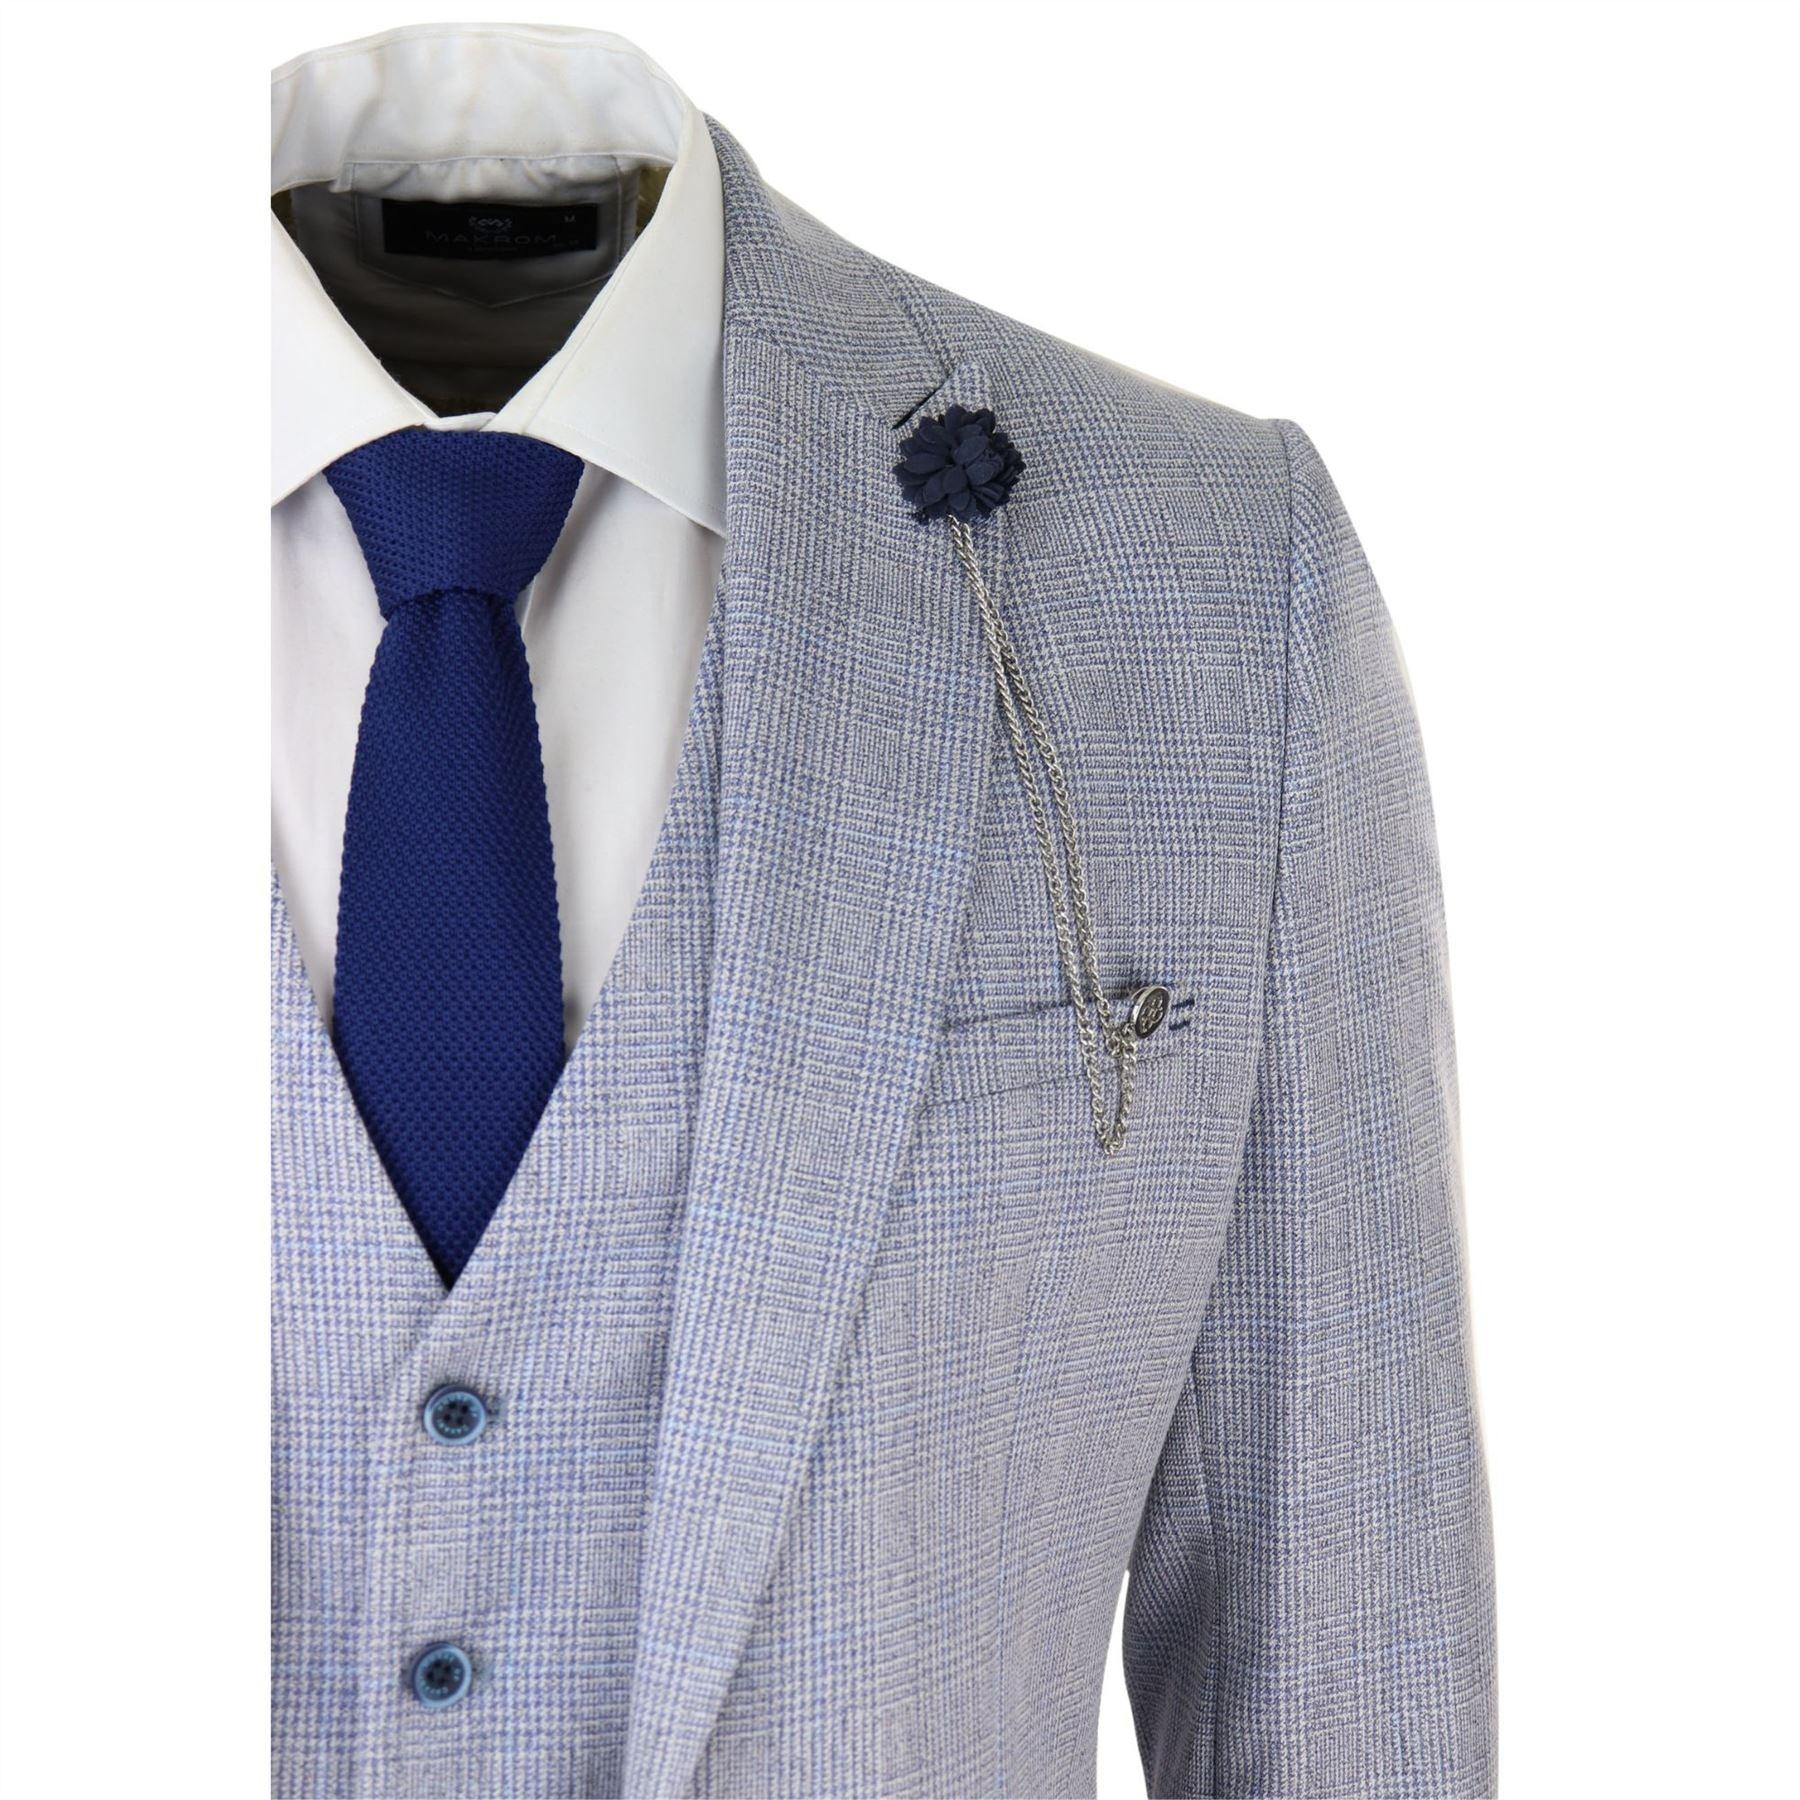 Mens 3 Piece Check Suit Tweed Light Blue Tailored Fit Wedding Peaky Classic - Knighthood Store